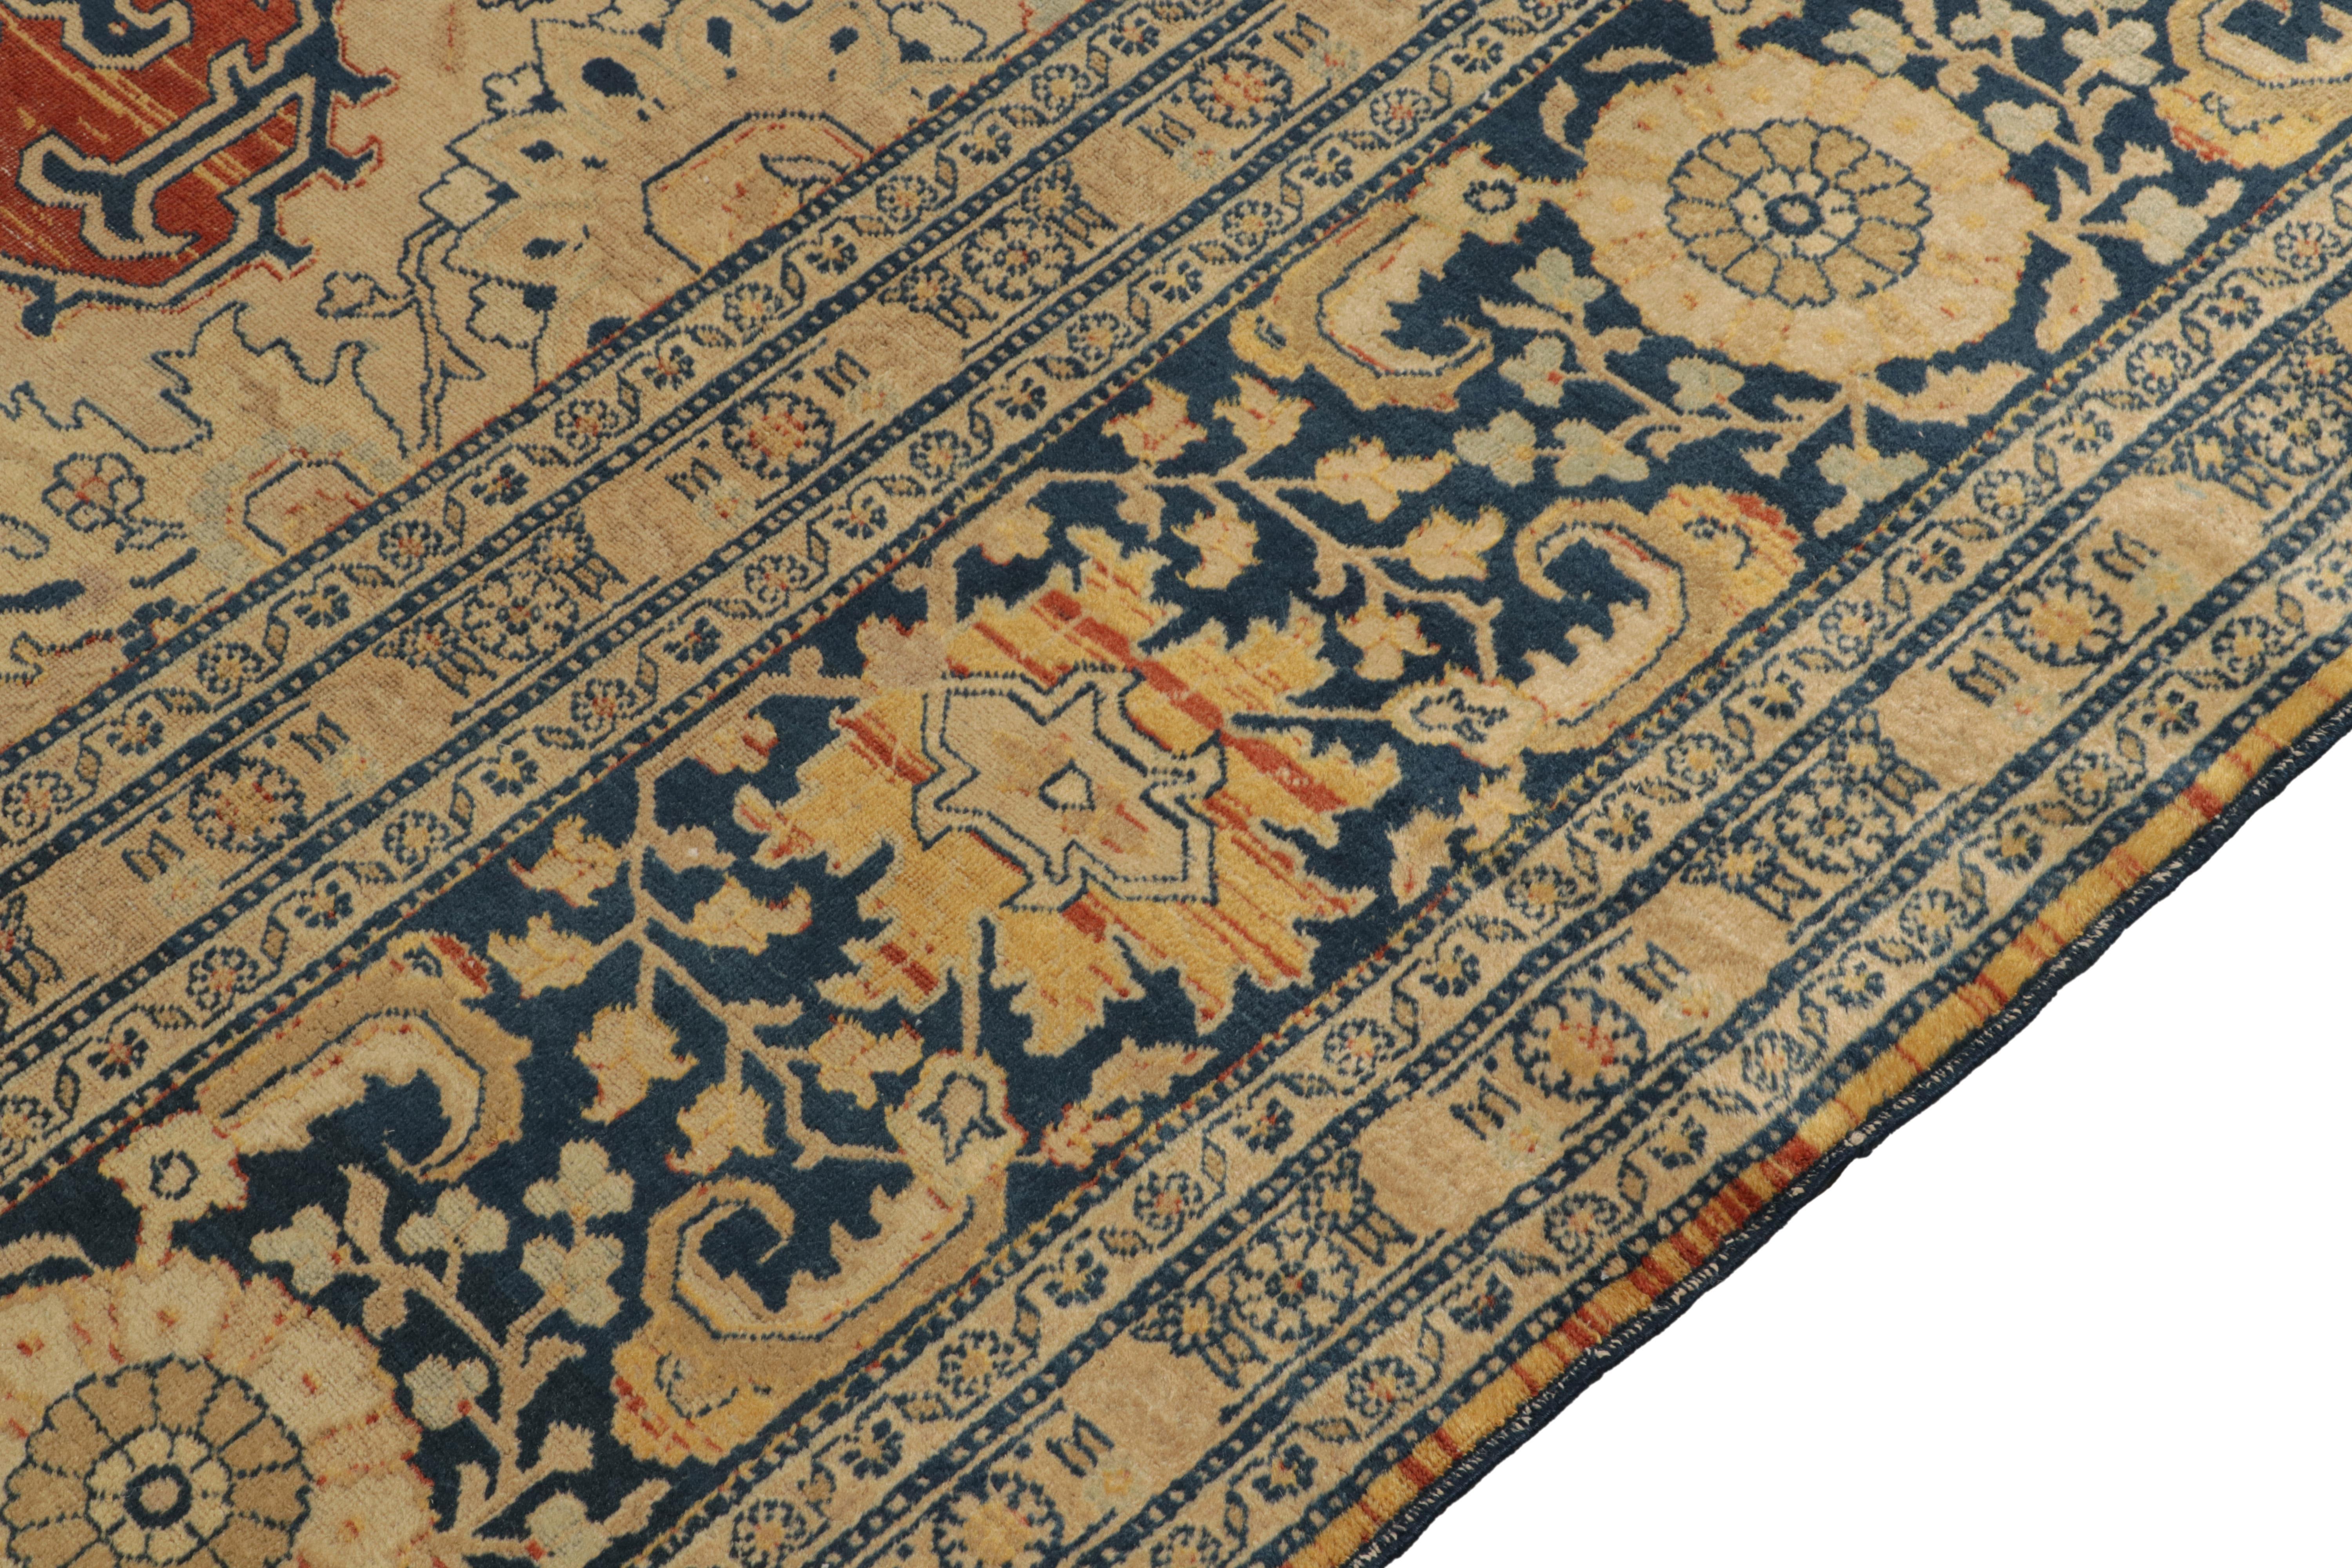 Antique Tabriz rug in Orange Blue, Beige Floral Medallion Pattern by Rug & Kilim In Good Condition For Sale In Long Island City, NY